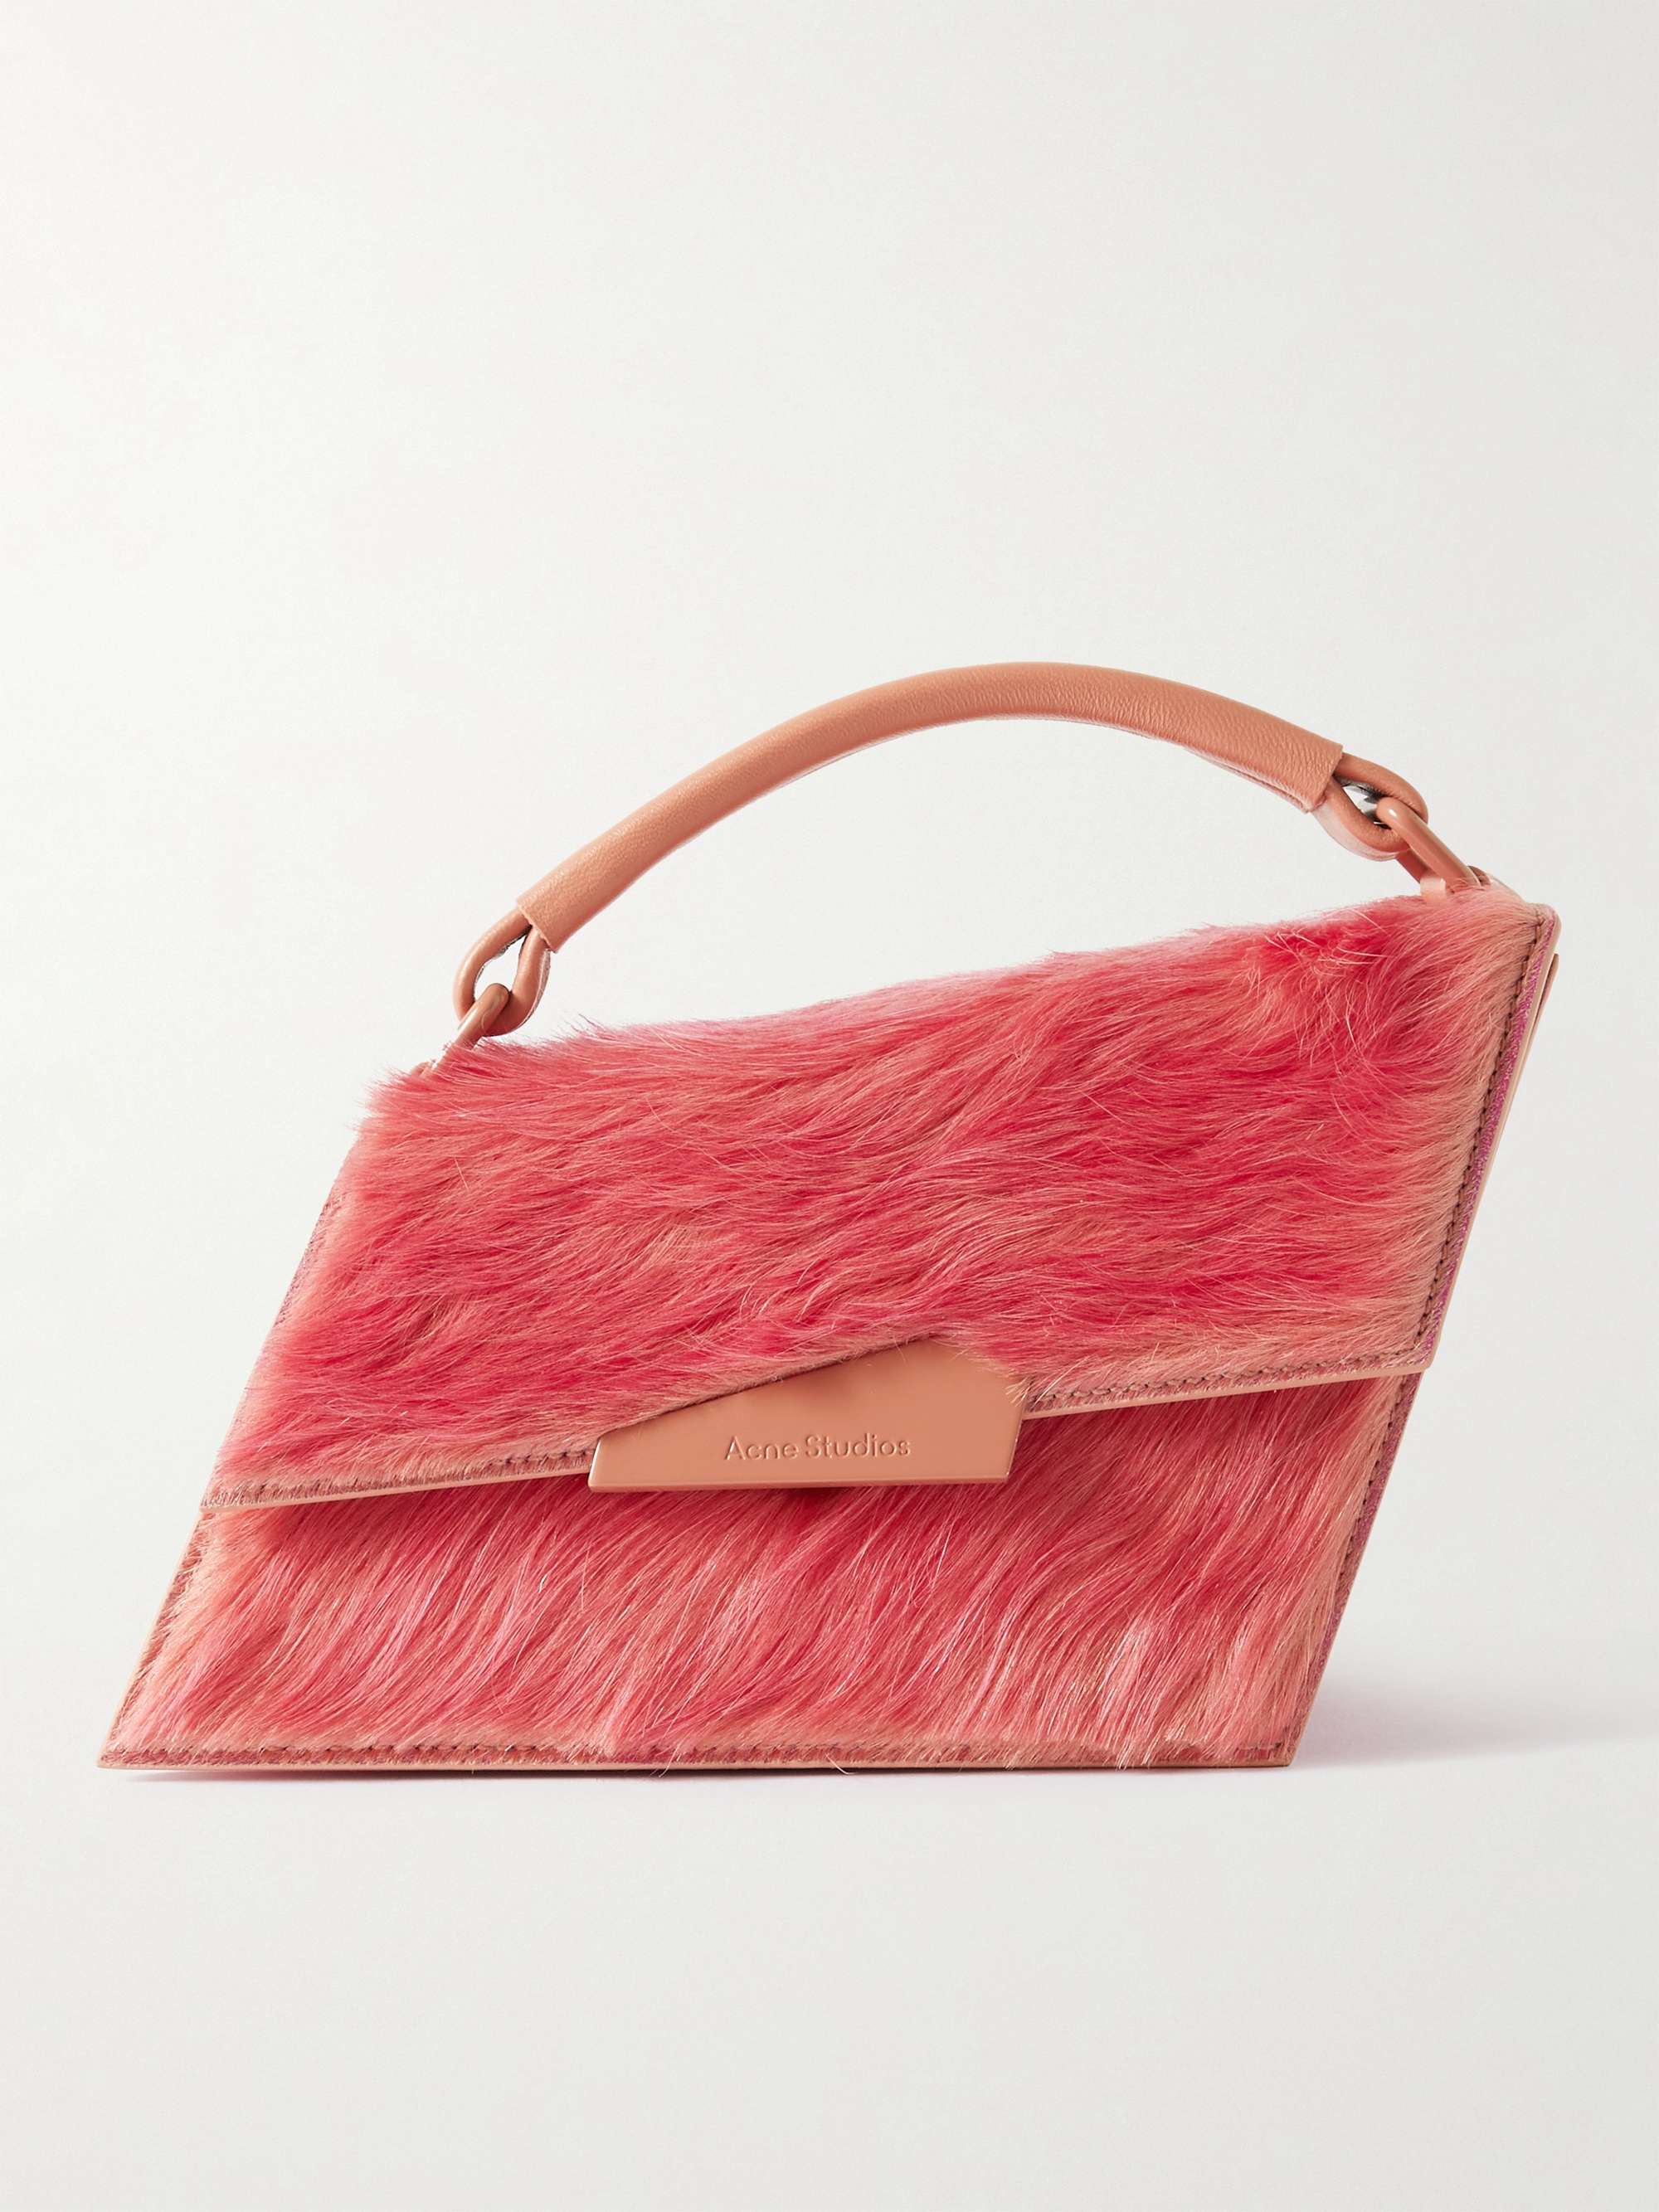 ACNE STUDIOS Distortion Calf Hair and Leather Shoulder Bag